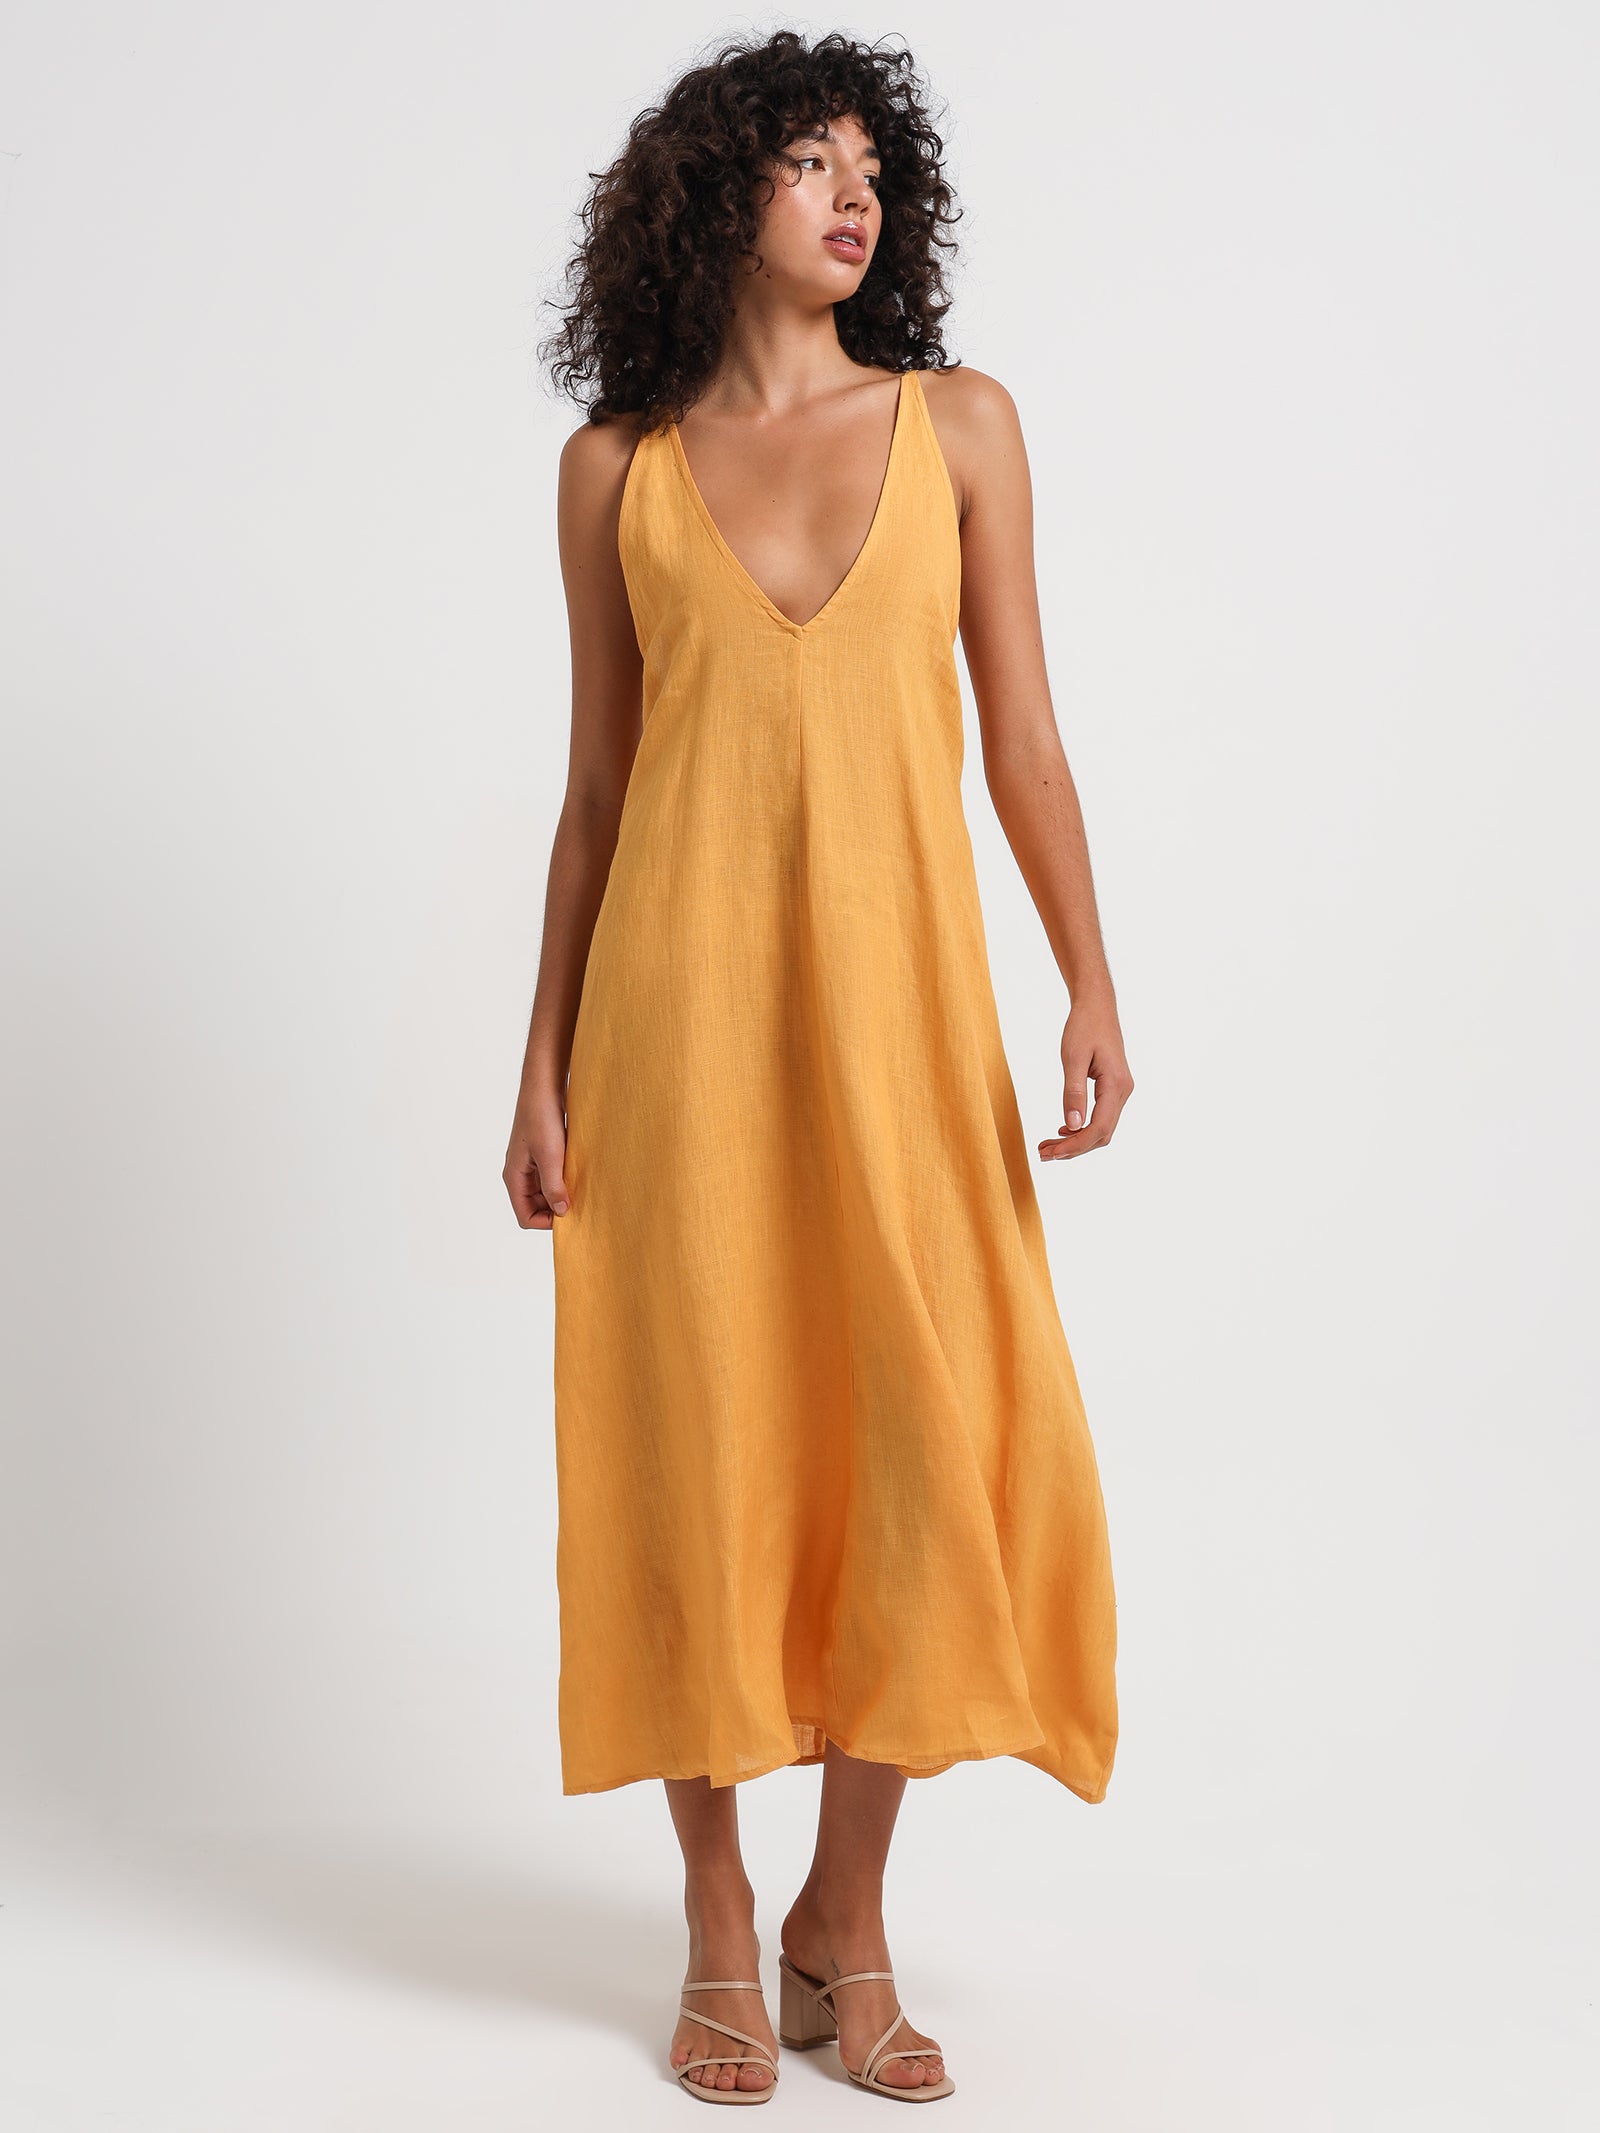 Lucia Maxi Dress in Sunset Yellow